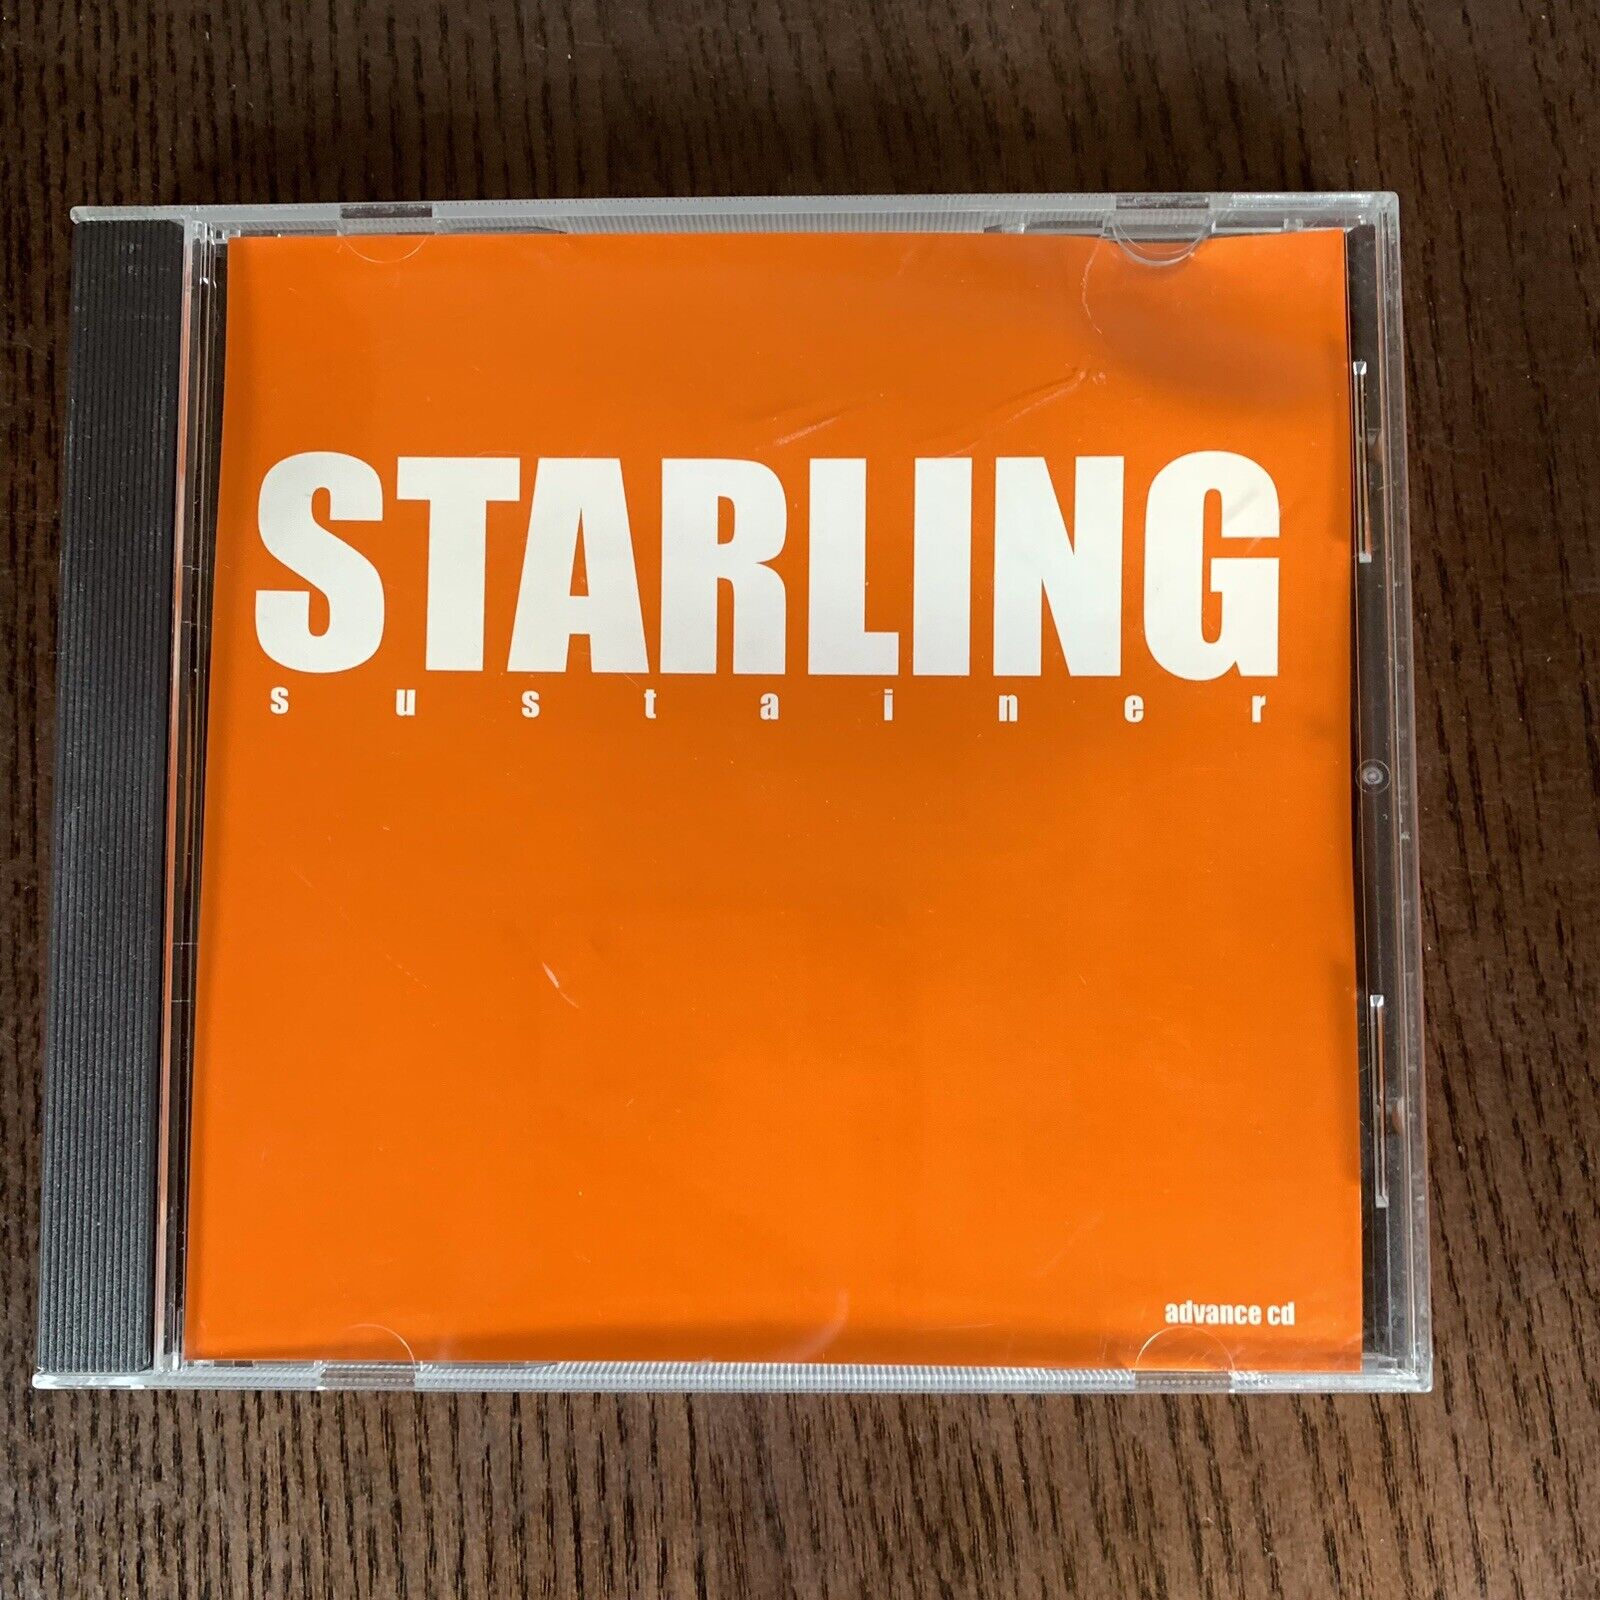 Starling Sustainer Advance CD Rare 2000 USA Promo Only